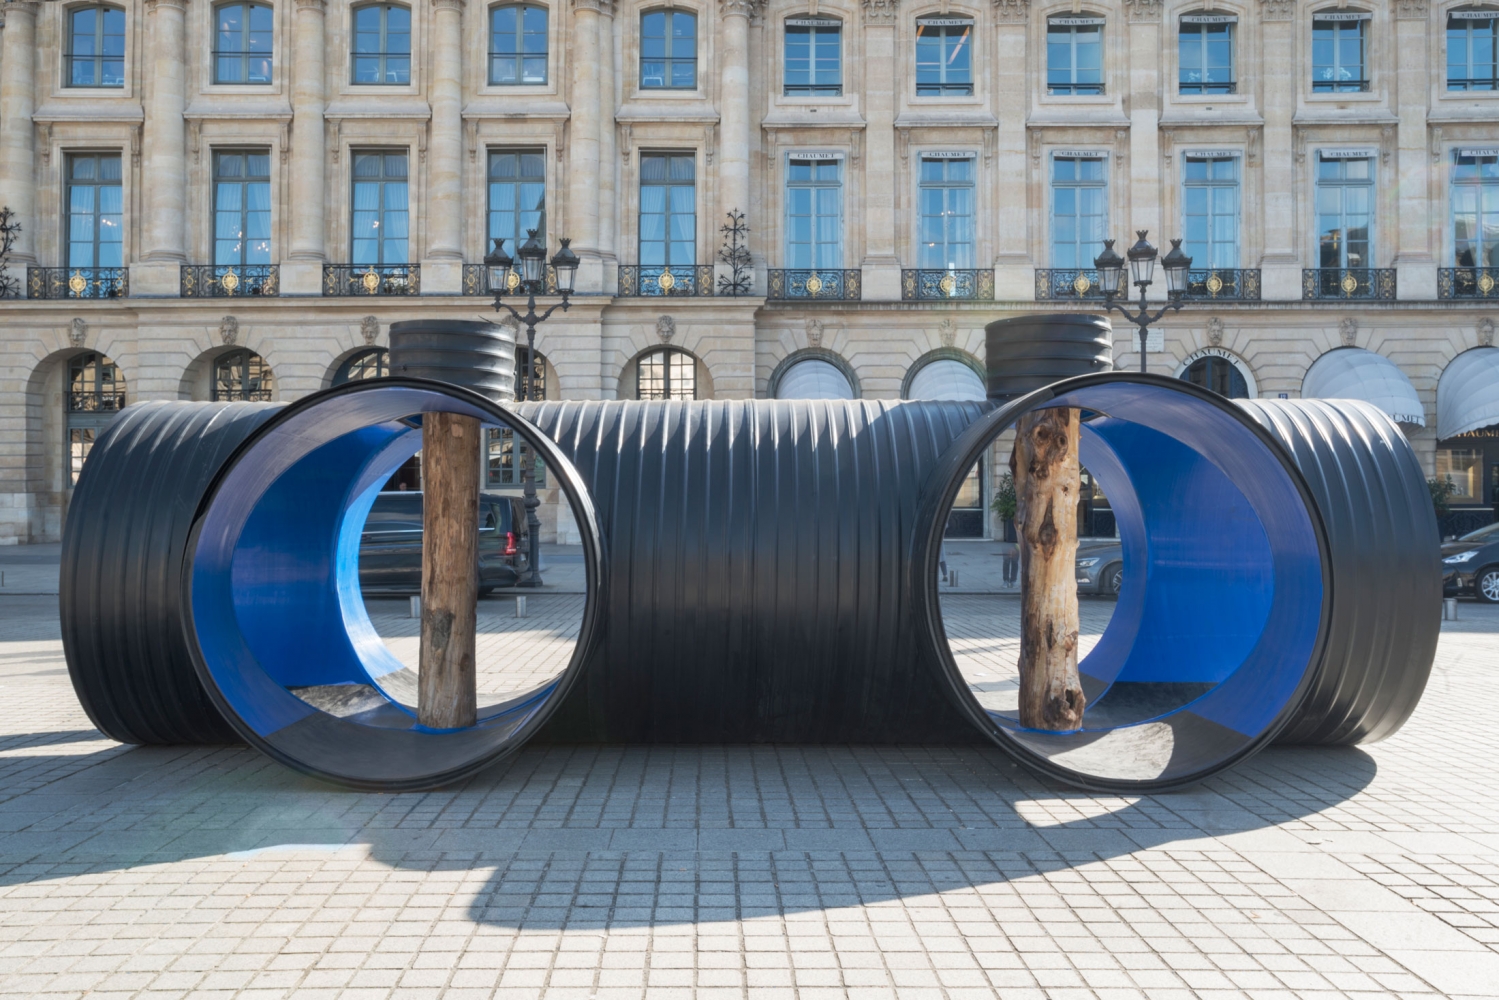 Oscar Tuazon
Water Column, 2017
One of four elements in&amp;nbsp;Une Colonne d&amp;#39;Eau, 2017
Thermoplastic hoses, tree trunks
105 2/3 x 82 3/4 x 315 inches
(268 x 210 x 800 cm)
Installation view
Place Vend&amp;ocirc;me, Paris (October 16&amp;nbsp;&amp;ndash; November 9, 2017)
Photograph by Marc Domage